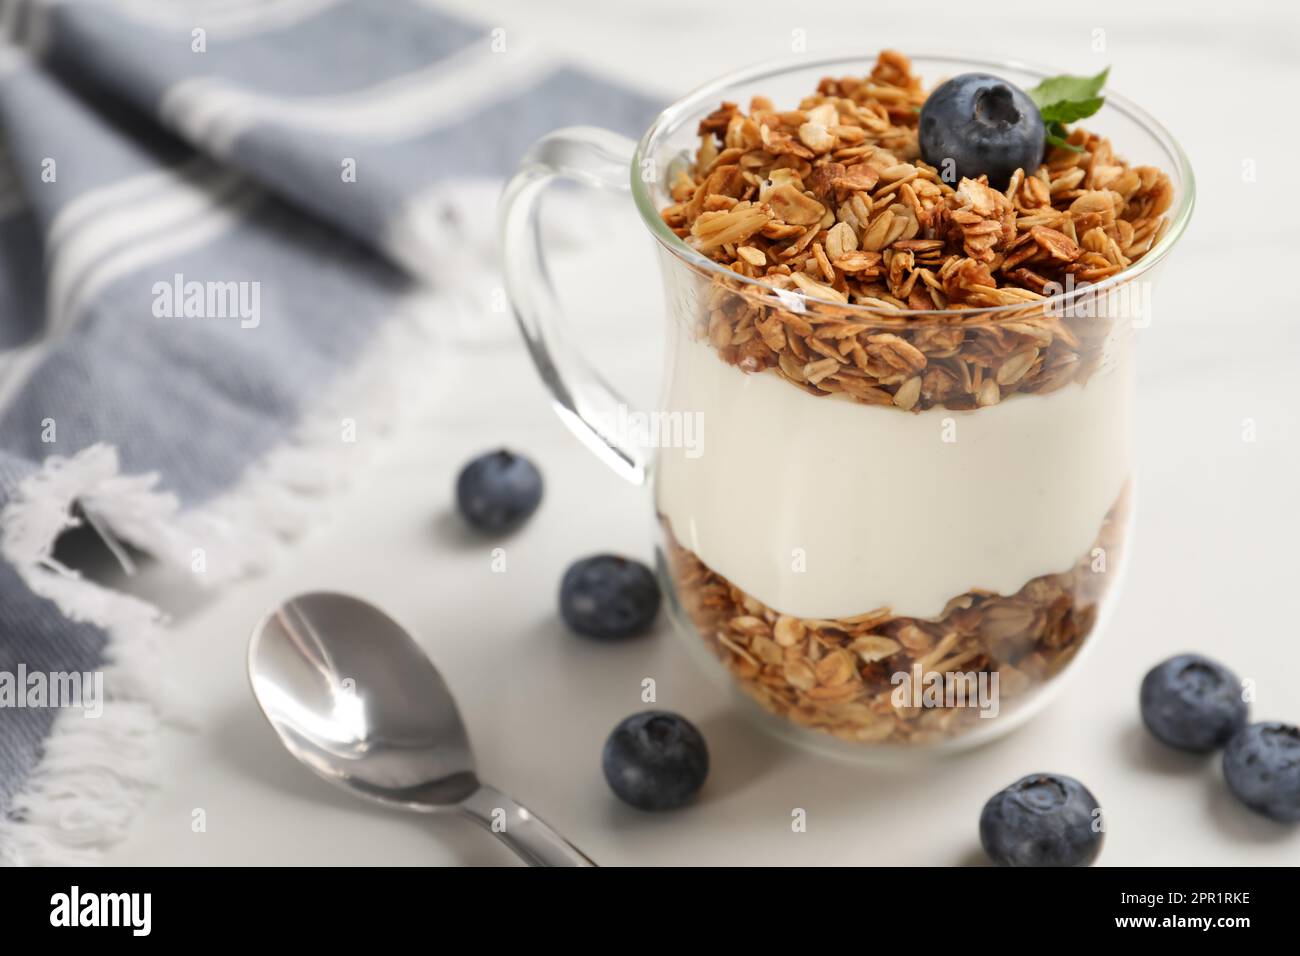 Tasty yogurt with muesli and blueberries served on white table Stock Photo